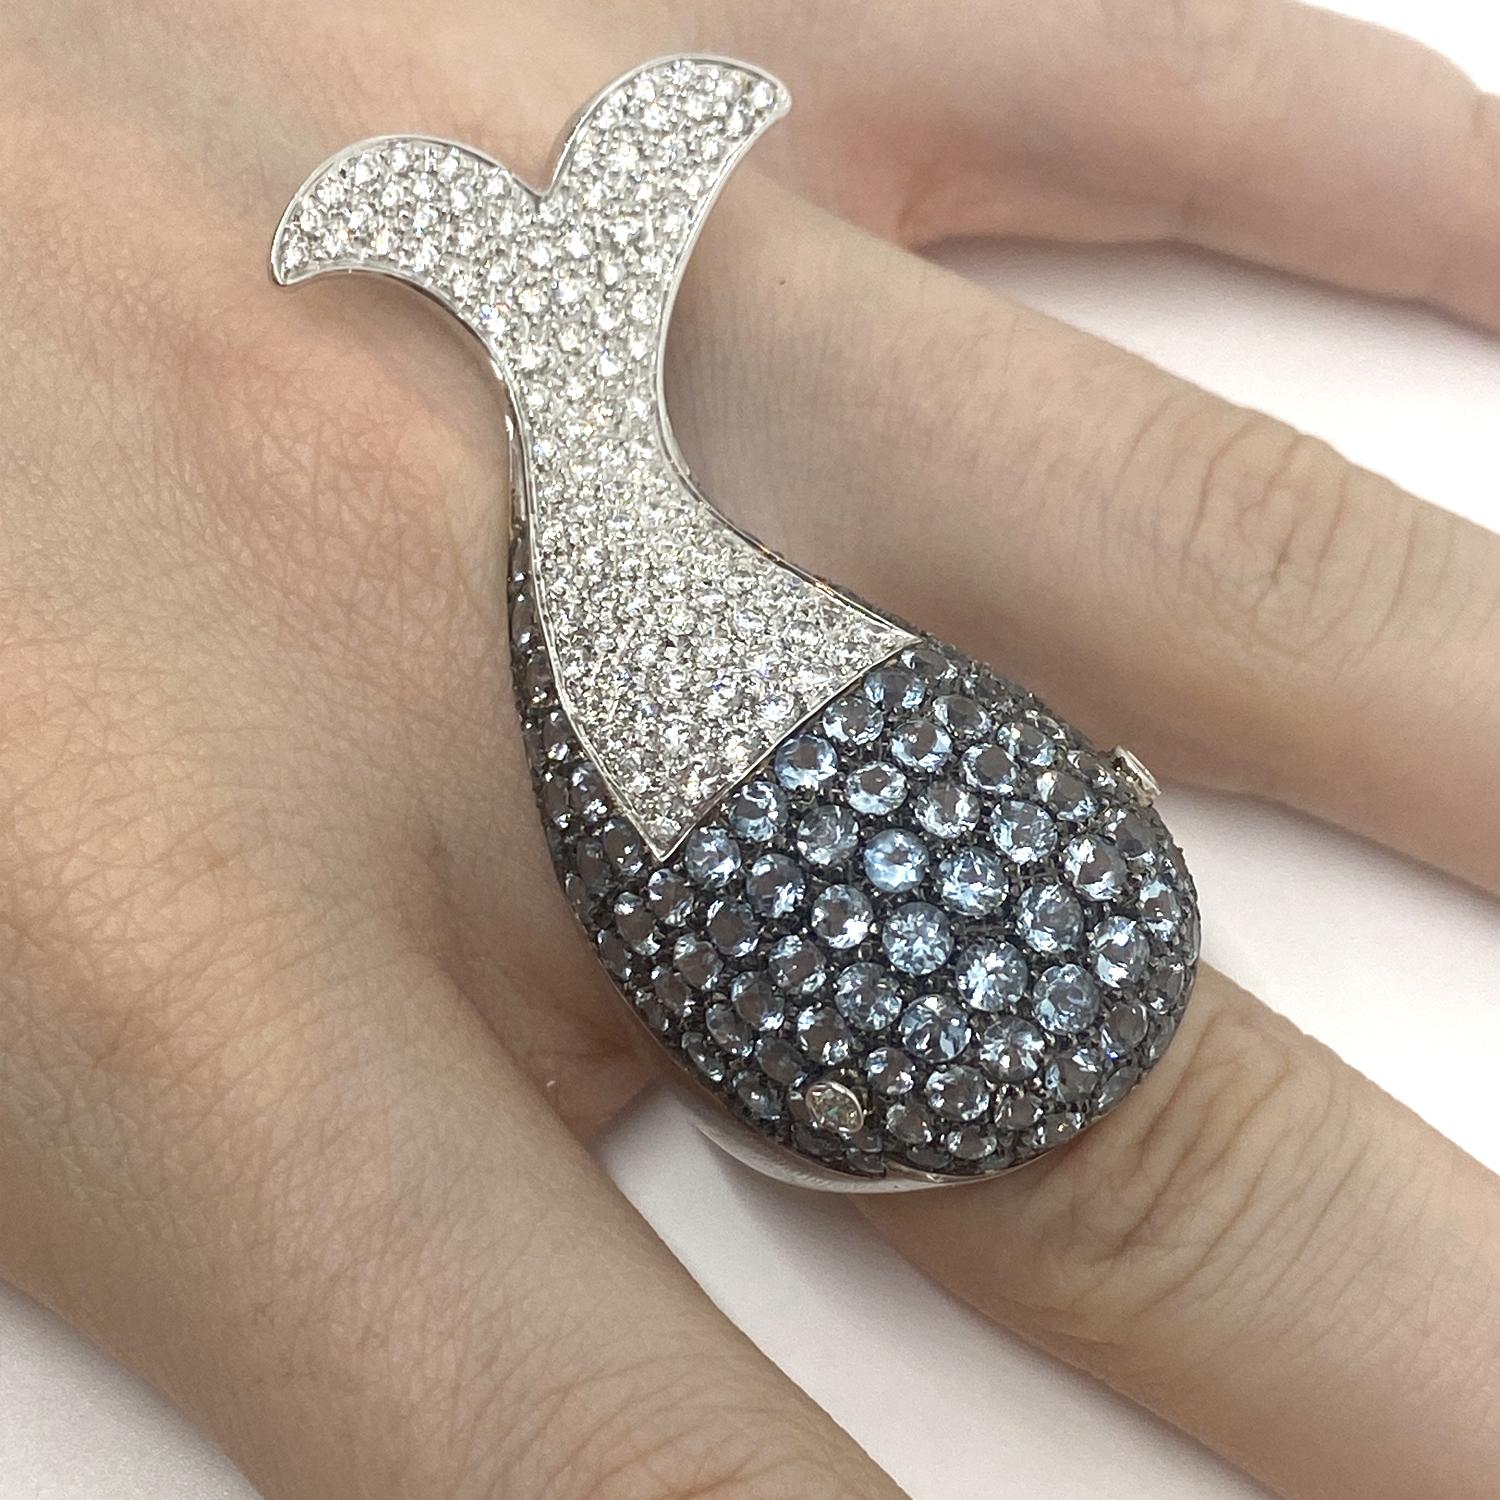 Whale Ring made of 18kt white gold with natural brilliant-cut diamonds for ct.1.71 and natural brilliant-cut aquamarine for ct.7.10

Welcome to our jewelry collection, where every piece tells a story of timeless elegance and unparalleled